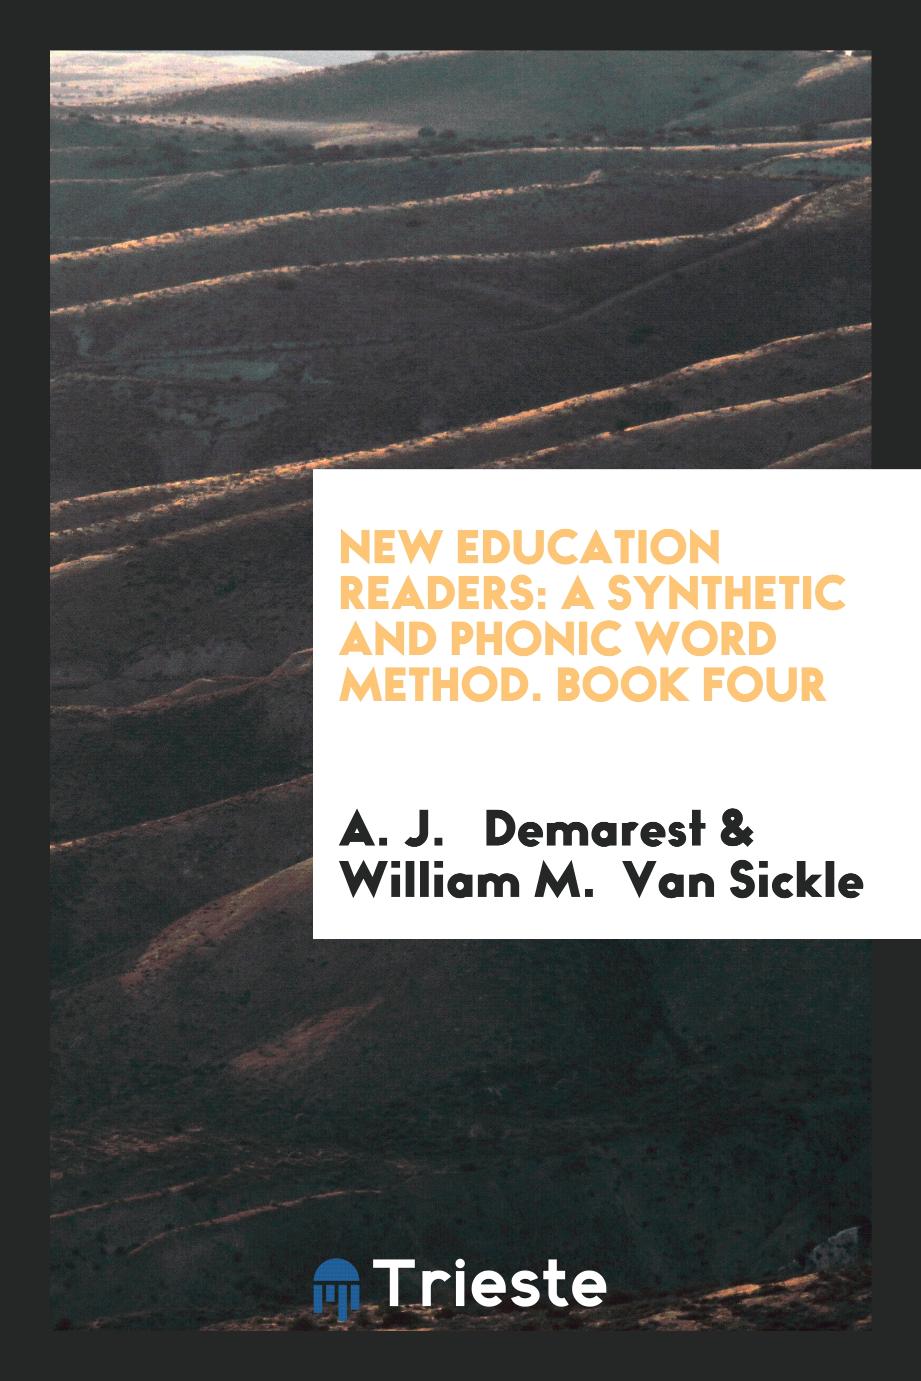 New Education Readers: A Synthetic and Phonic Word Method. Book Four